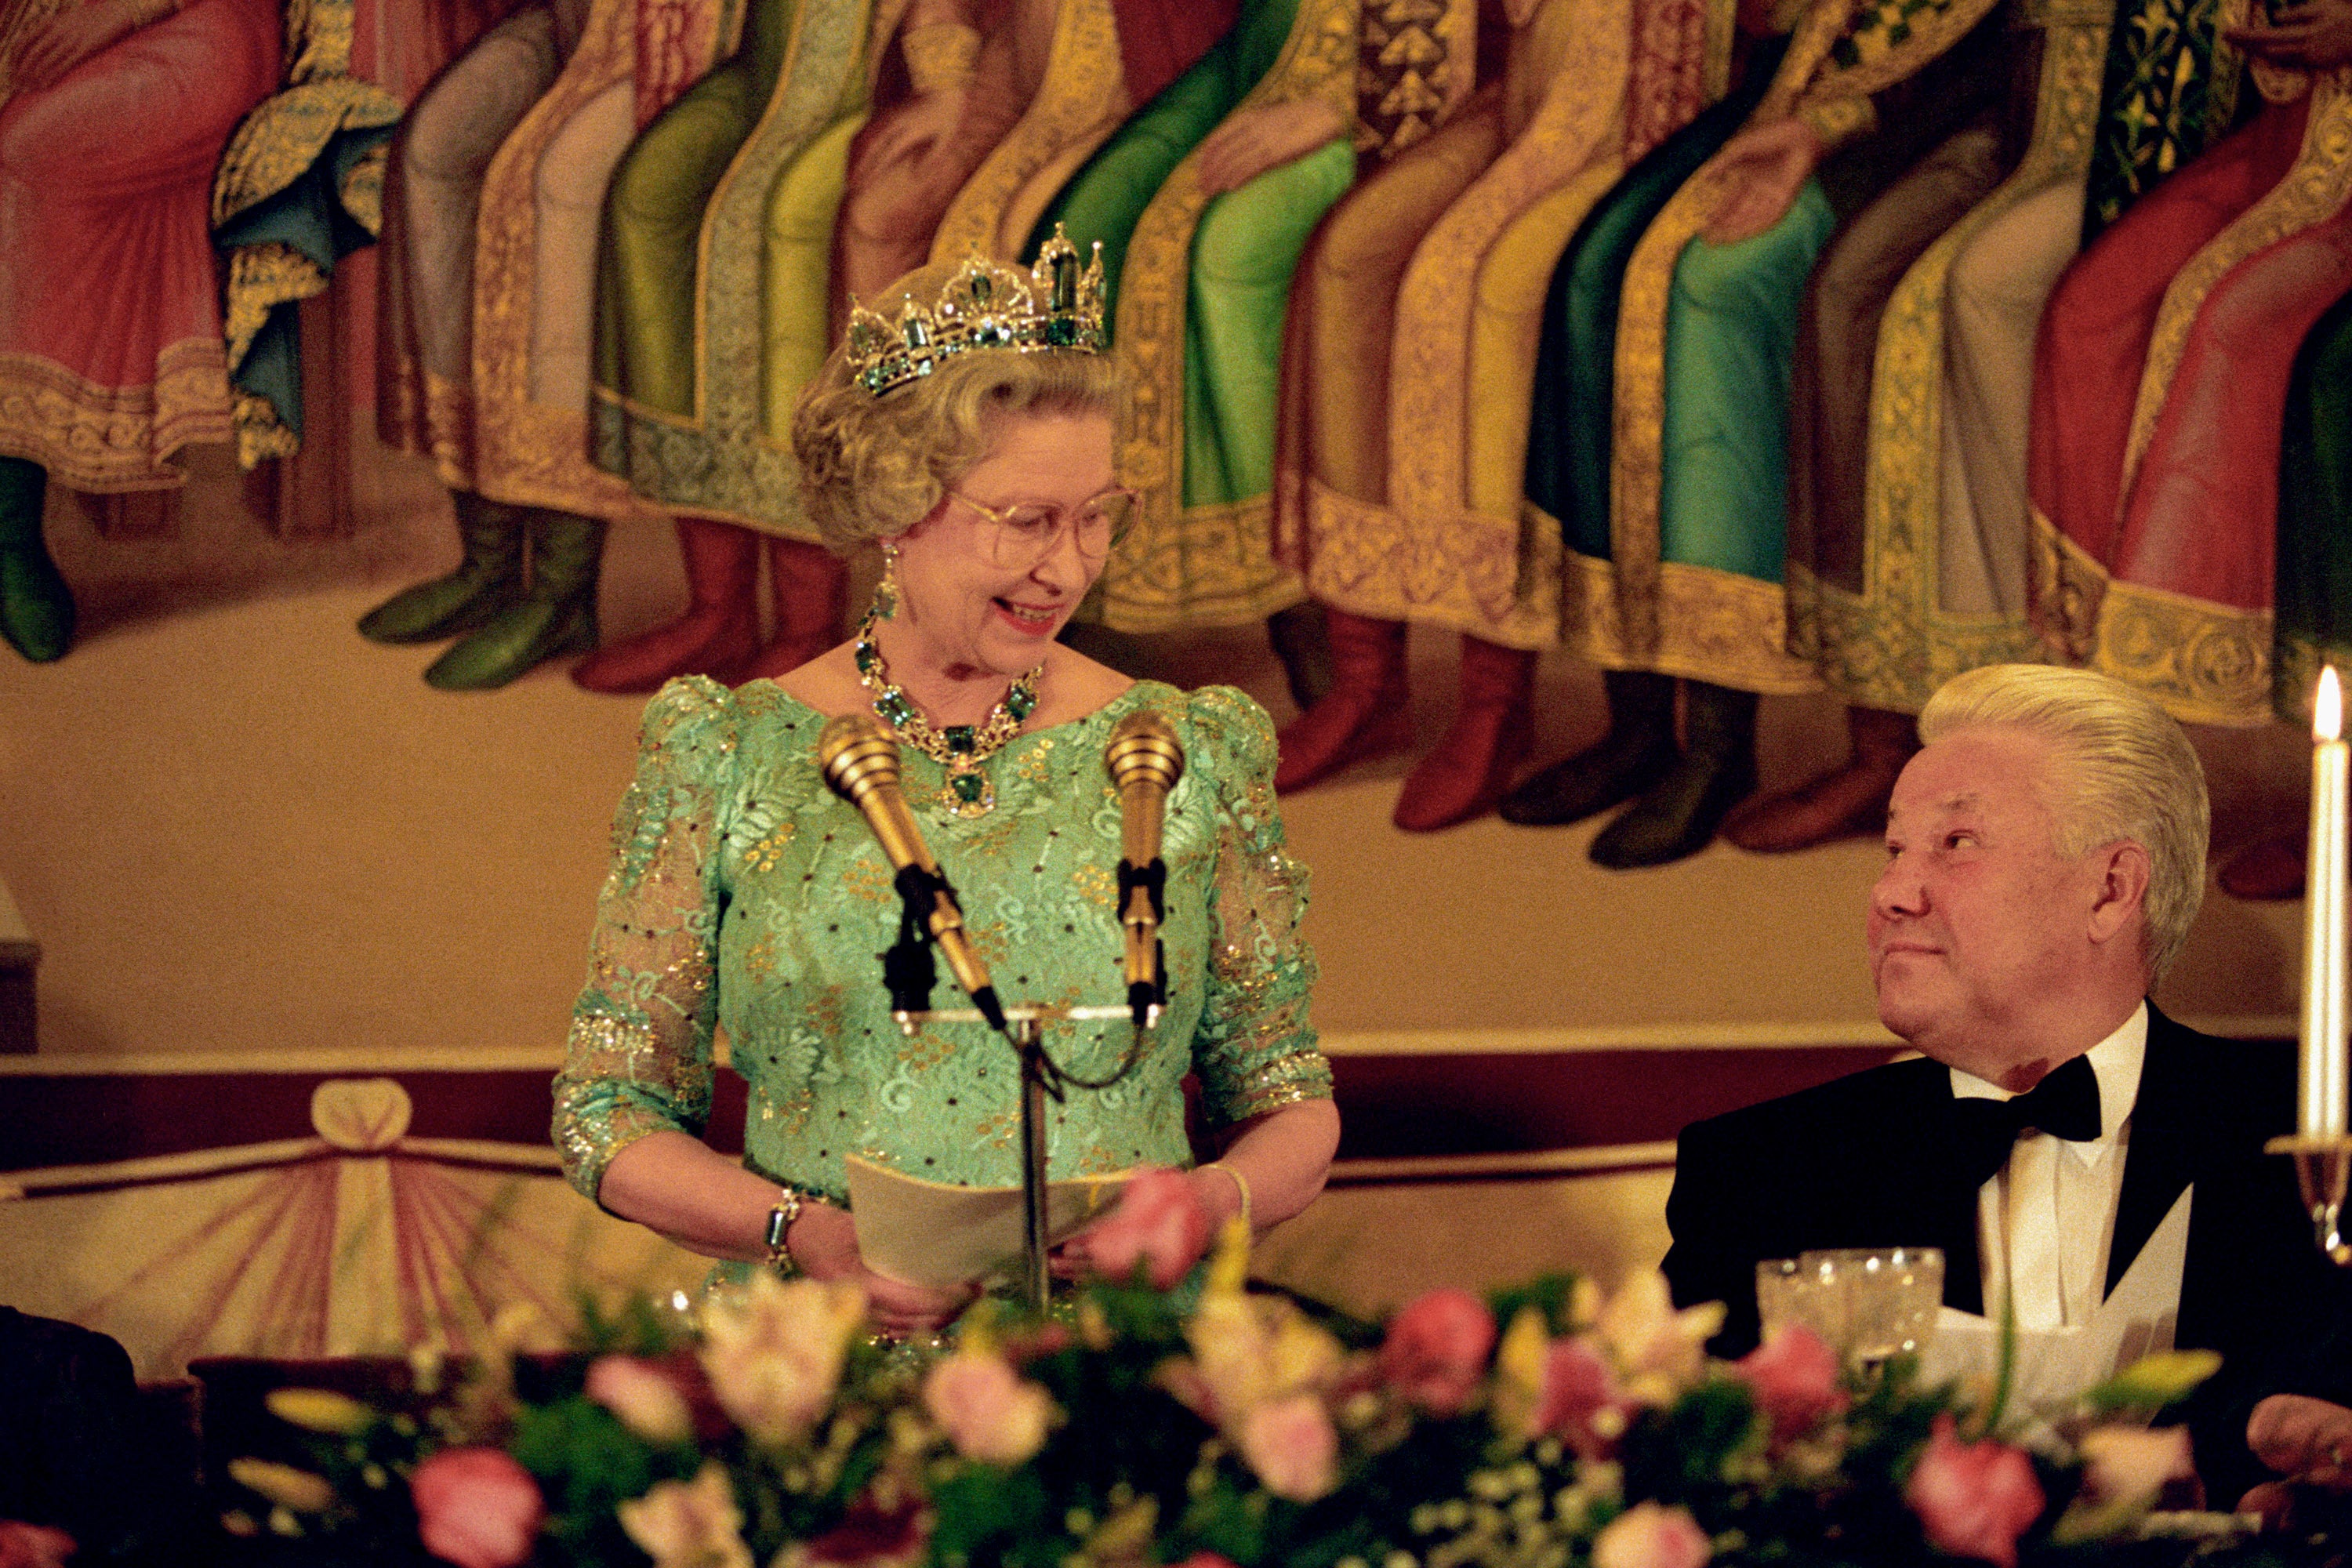 The Queen and Boris Yeltsin exchange a smile as the Queen makes a speech during a state banquet held in her honour at the Kremlin’s Faceted Hall in 1994 (Martin Keene/PA)